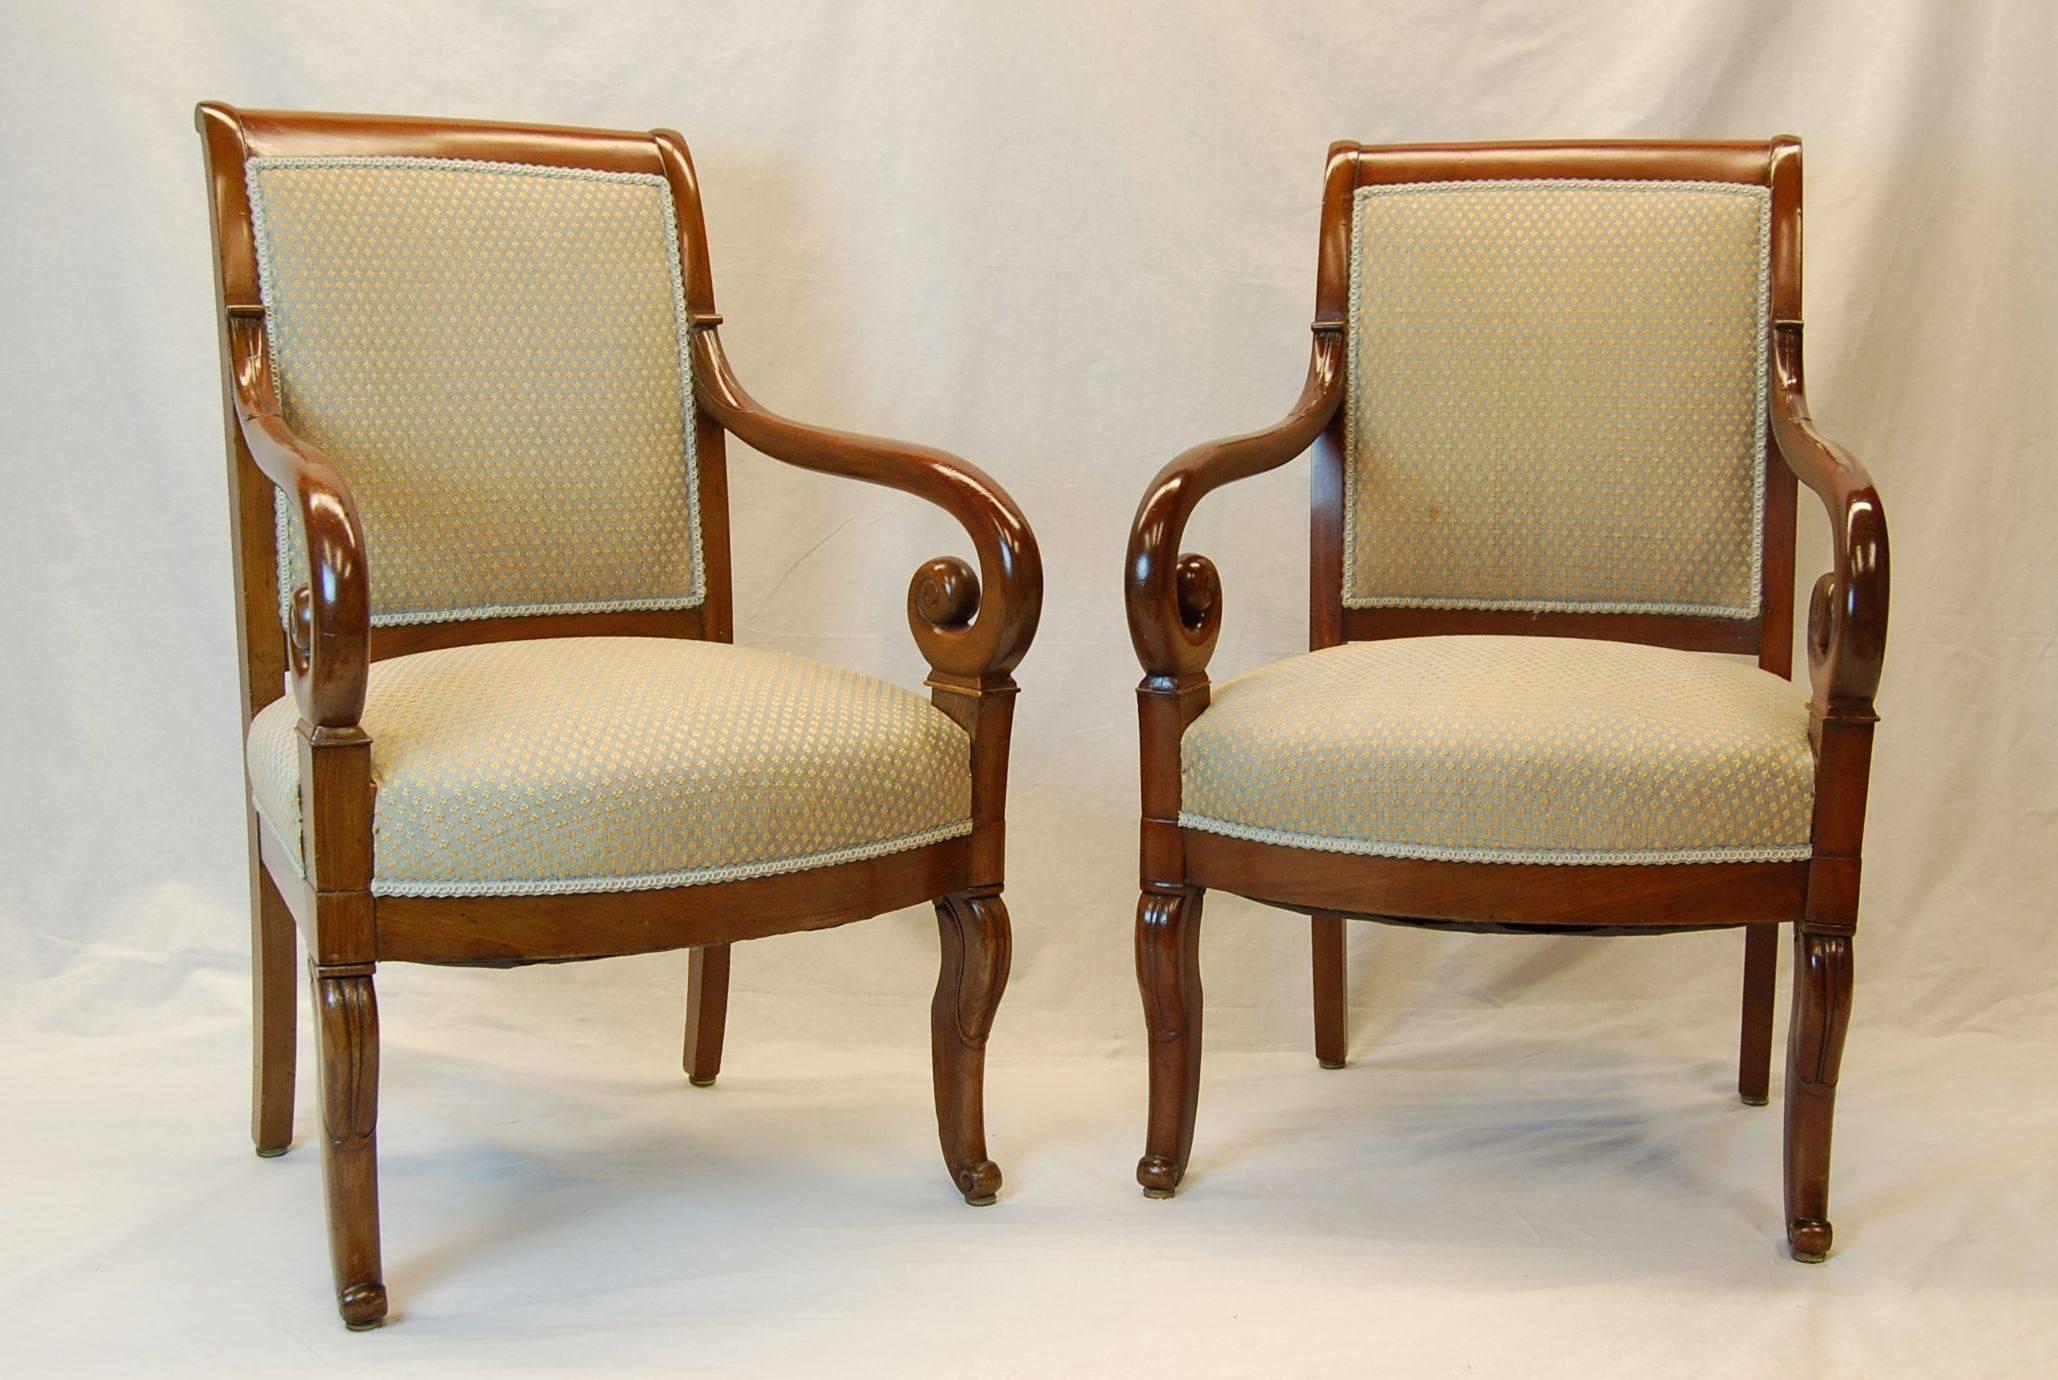 French Pair of Carved Mahogany Restauration Period Armchairs, Early 19th Century For Sale